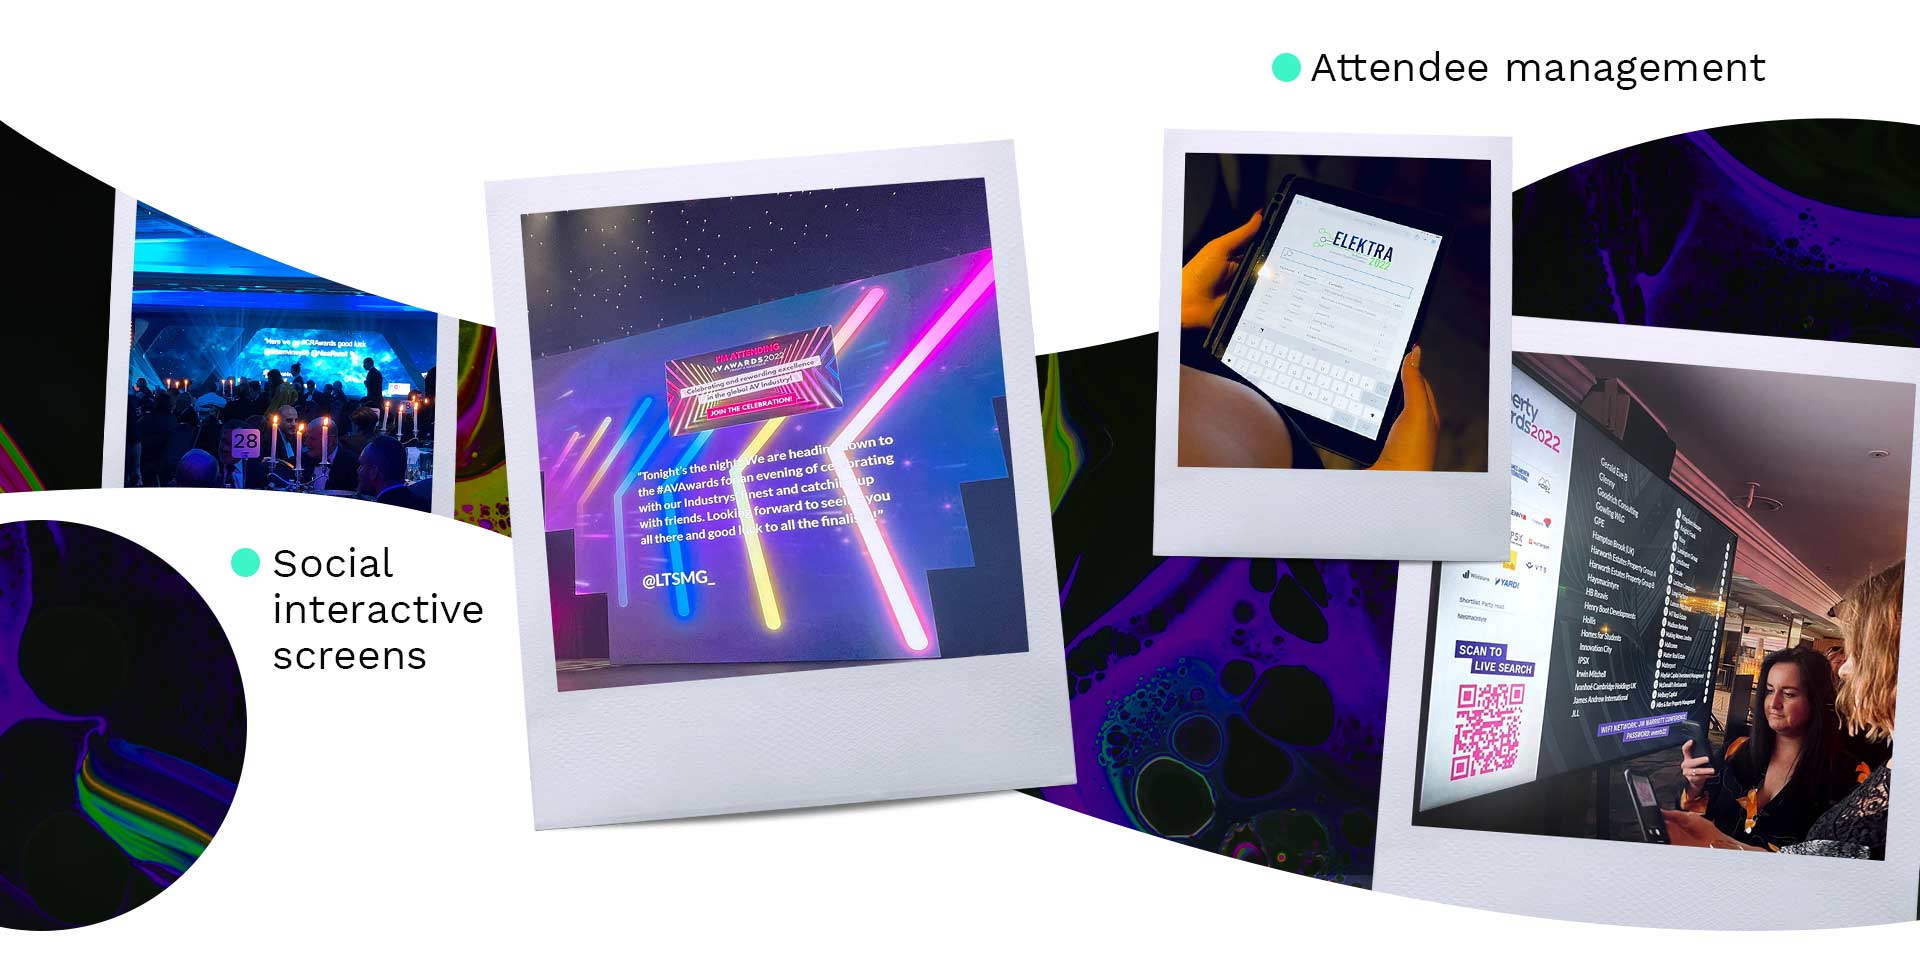 Event screens for attendee management and social interactions